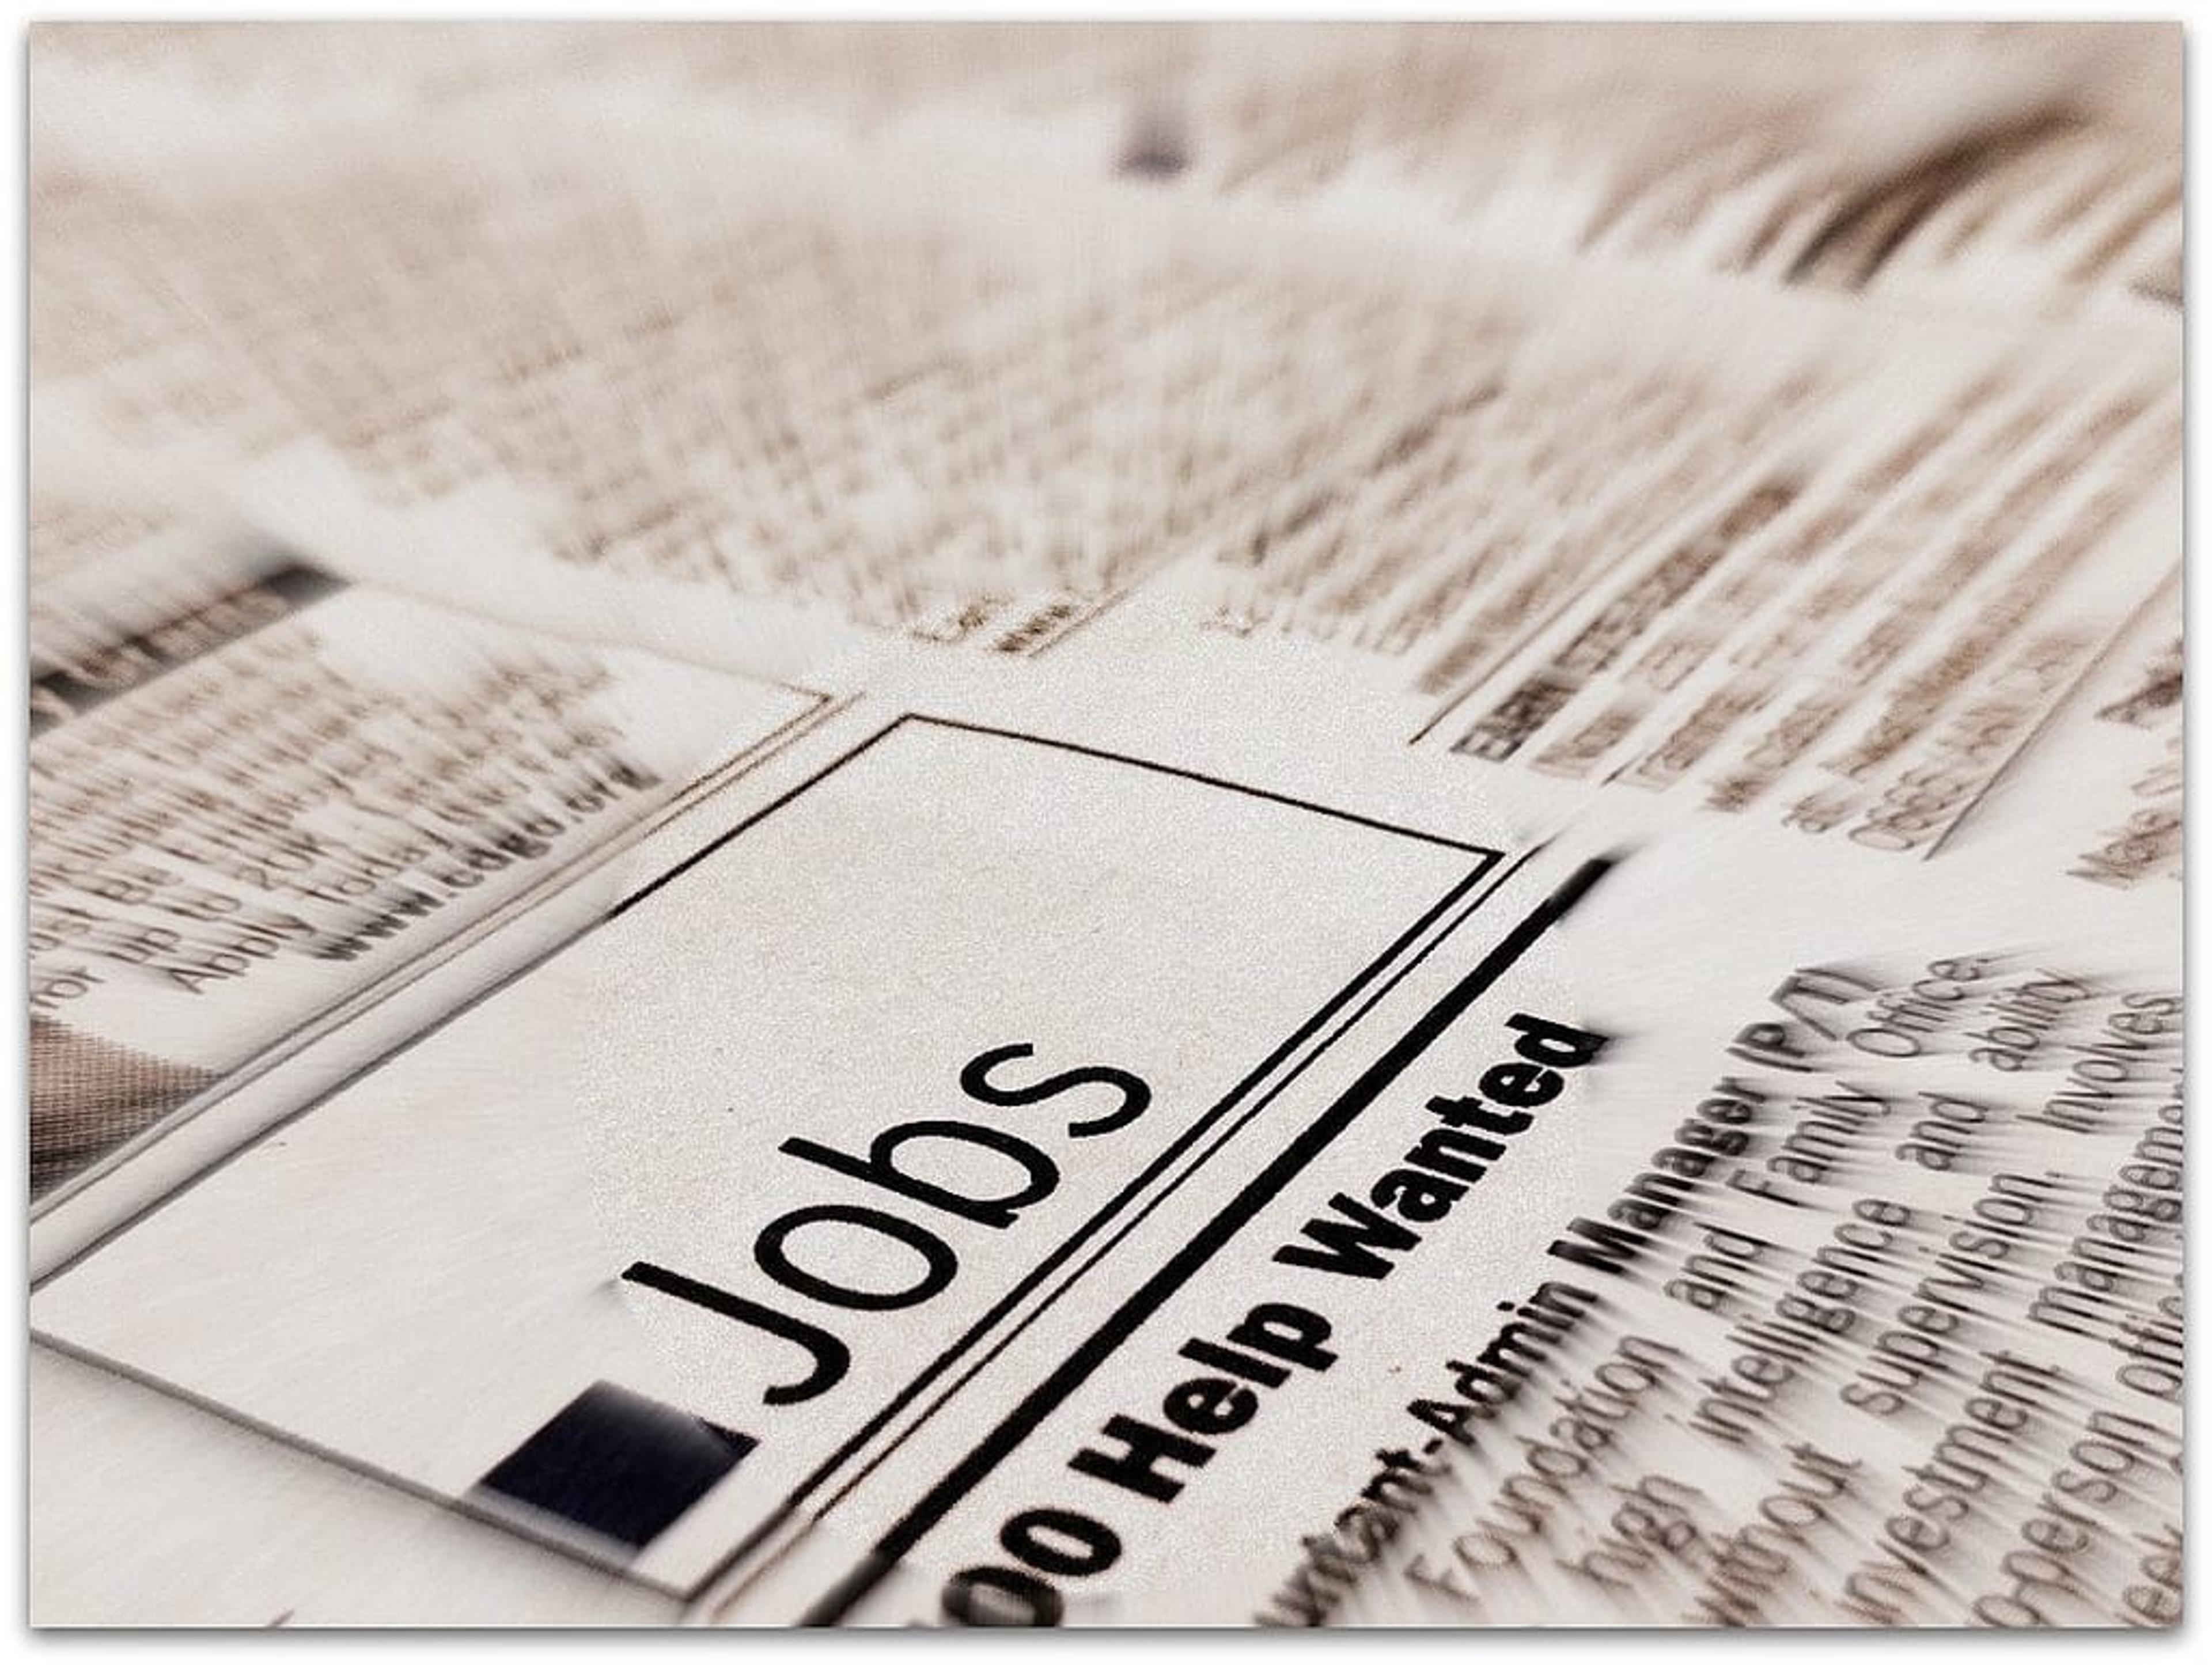 Black-and-white image of a "Help Wanted" ad in the "Jobs" section of a newspaper.